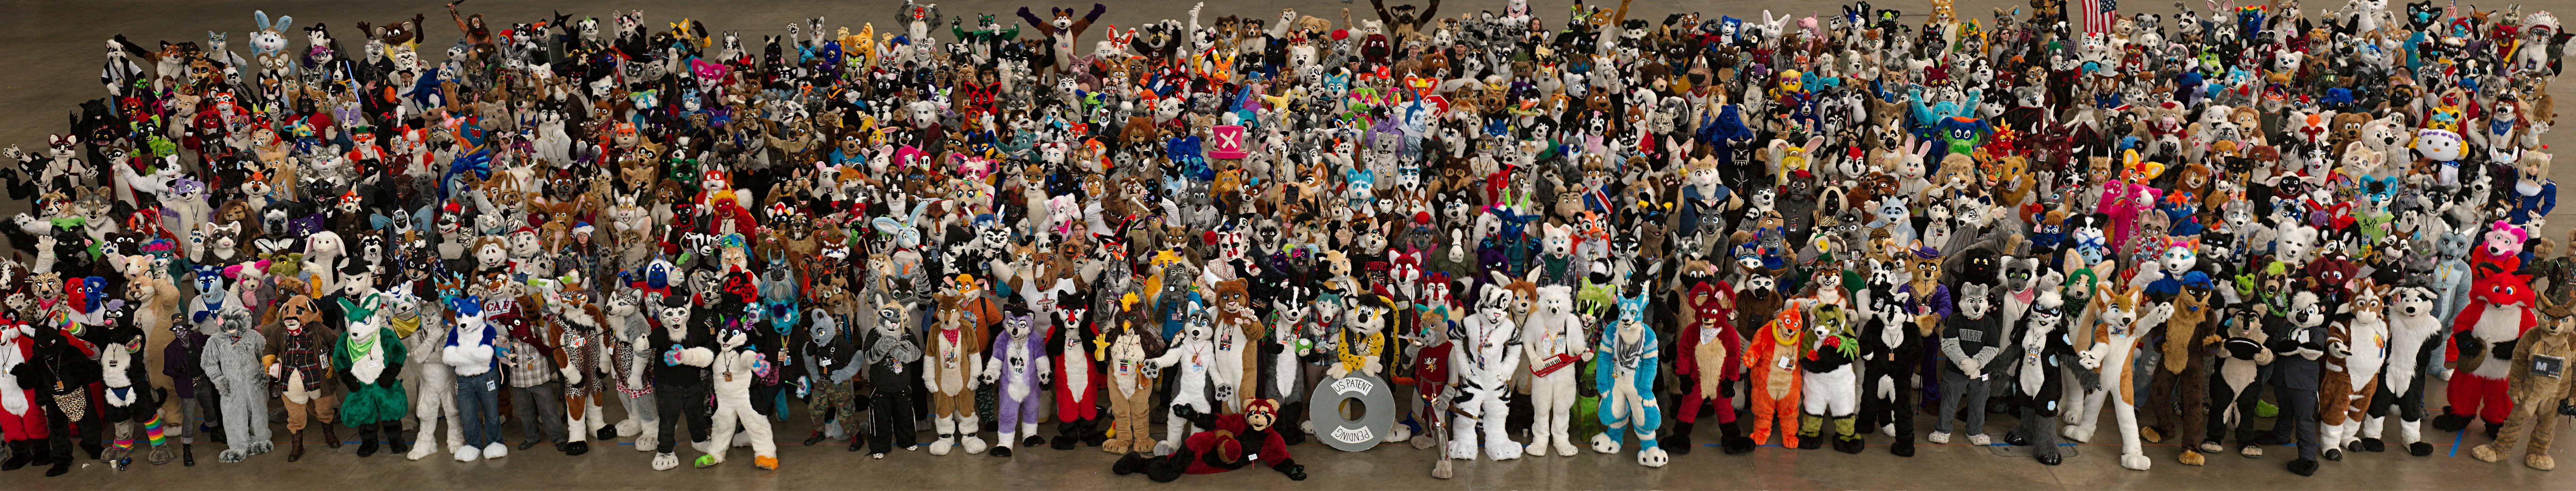 biggest-furry-convention-in-the-world-went-down-in-pittsburgh-heres-a-group-shot-of-some-attendees.jpg